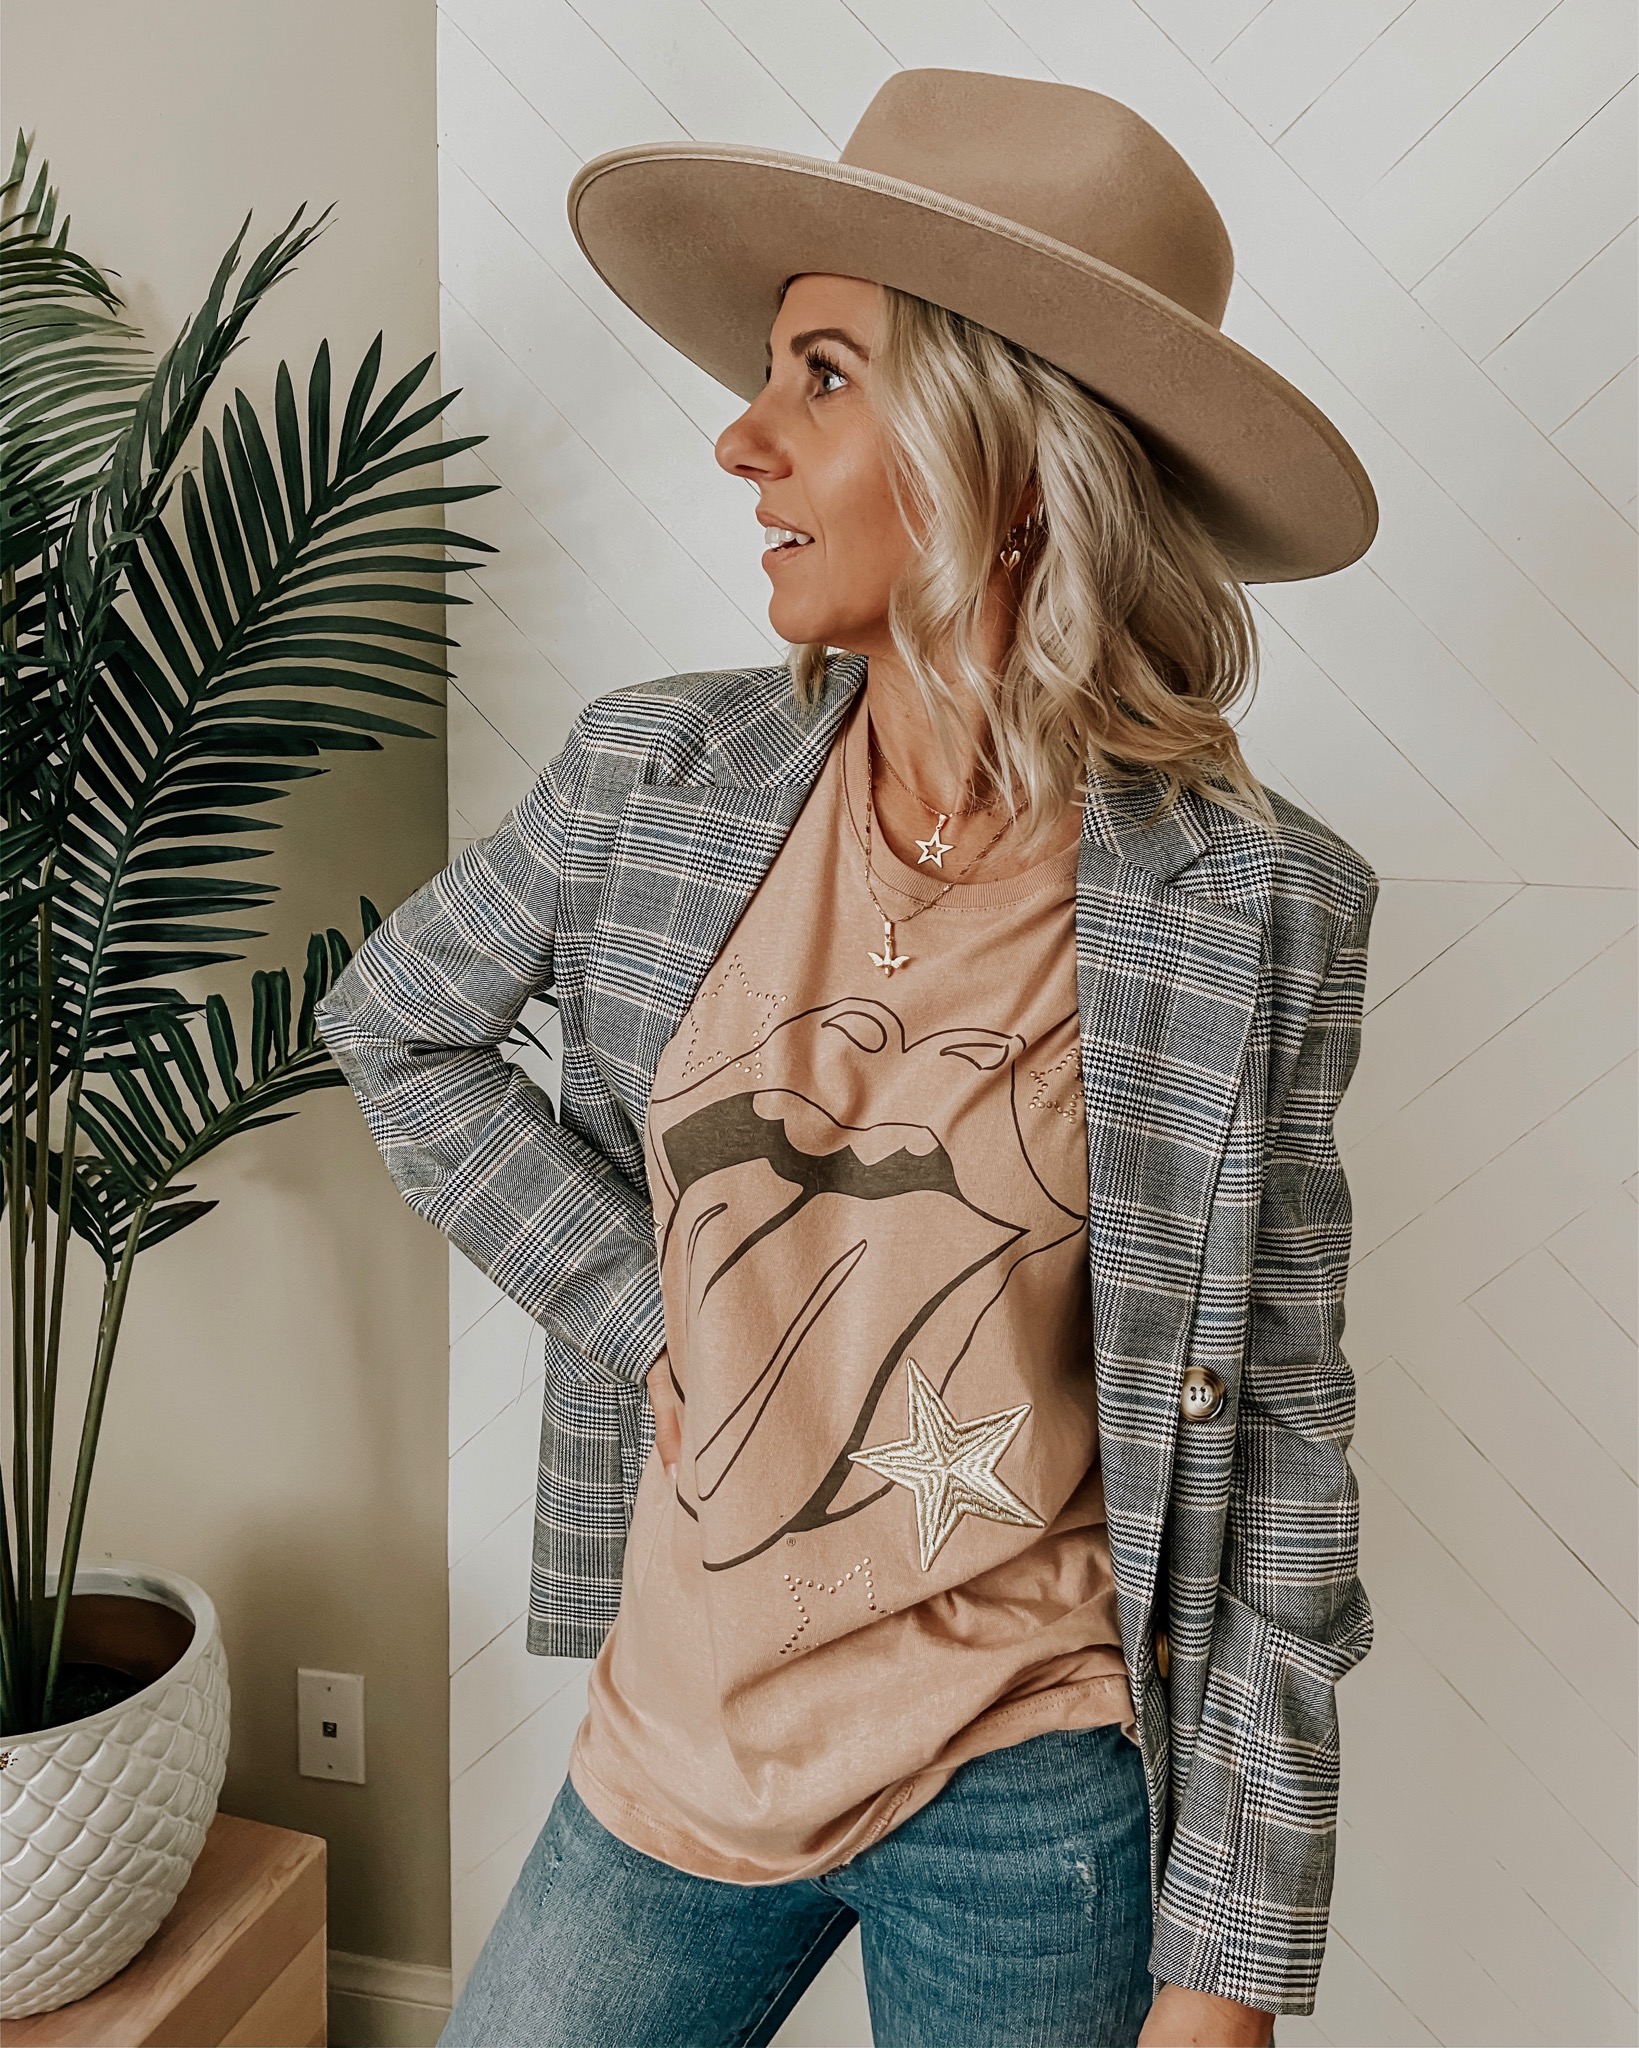 FALL HAT FINDS: SAVE VS SPLURGE + jaclyn De Leon Style- Sharing my latest hat favorites for Fall including must have splurges and great save options